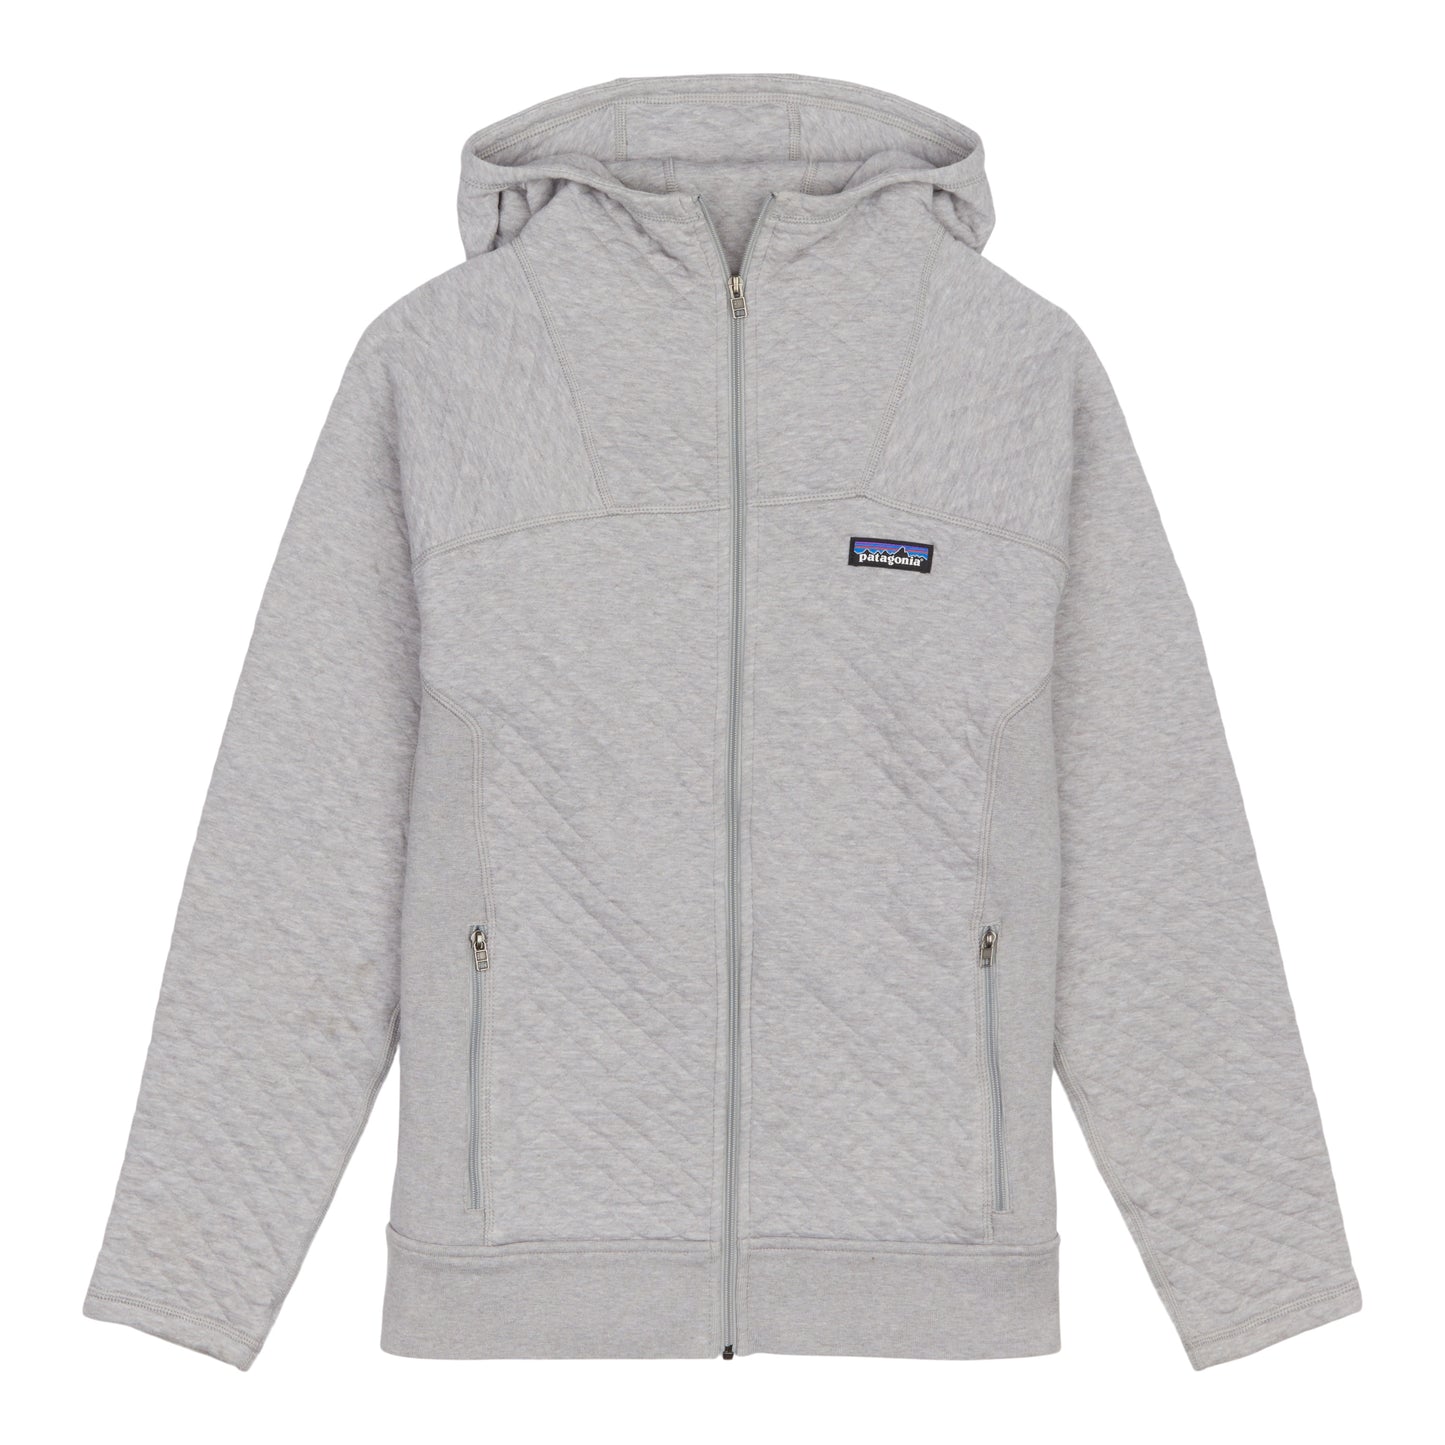 W's Cotton Quilt Hoody